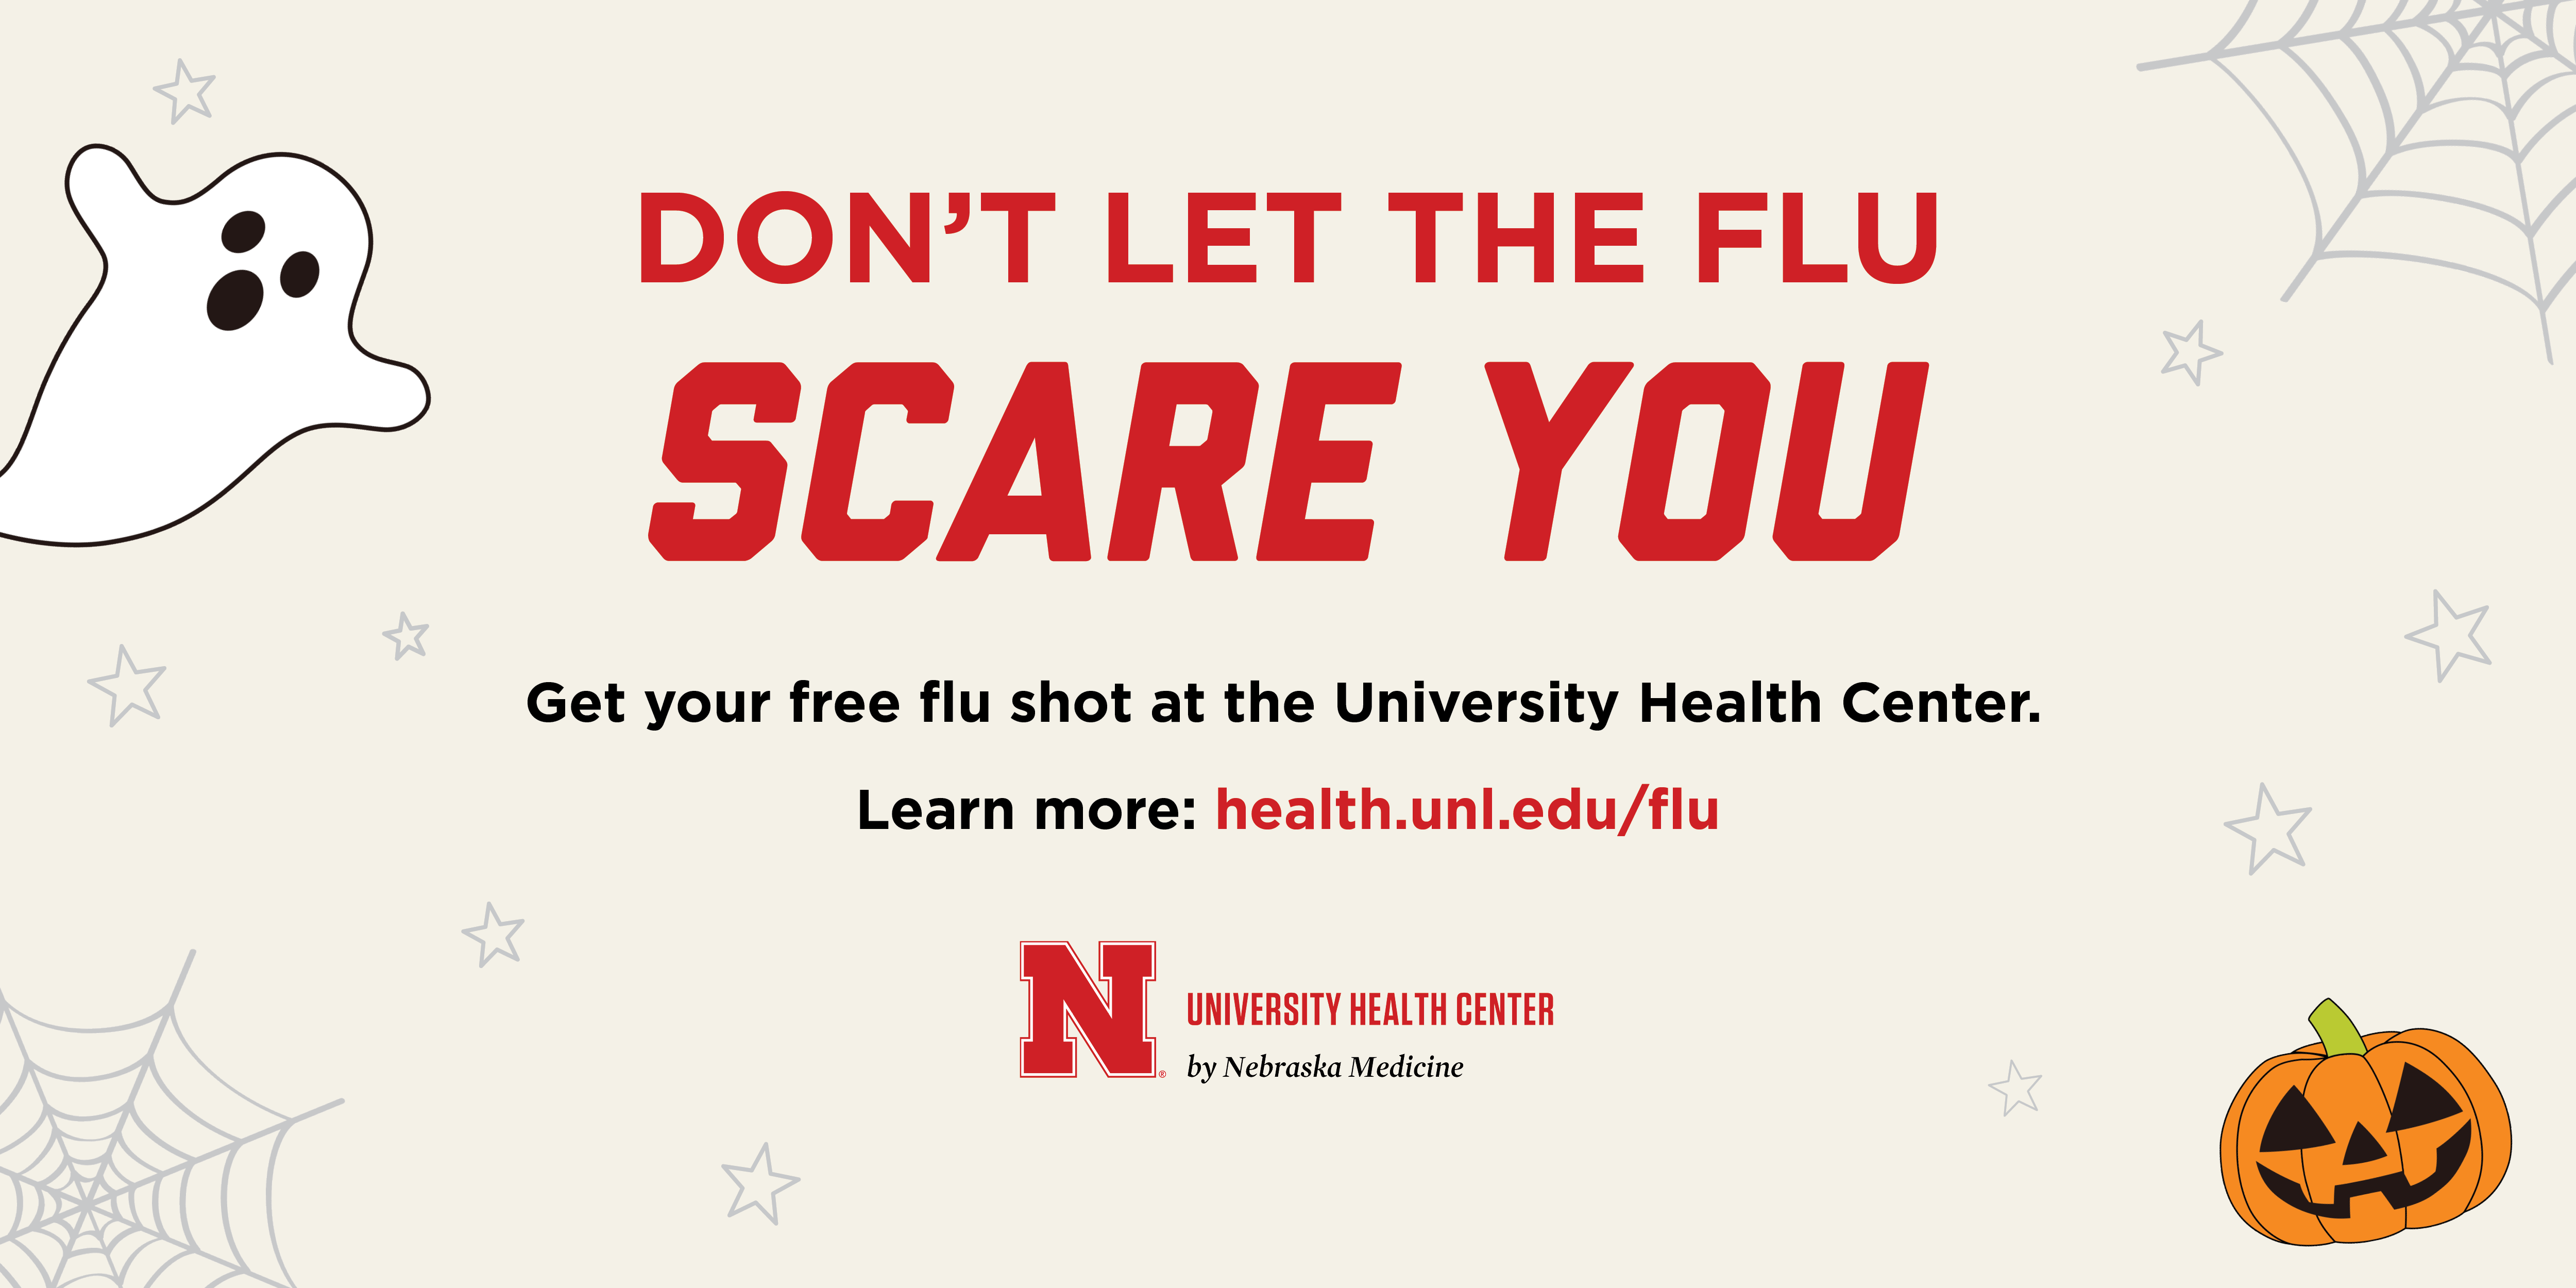 UNL students can get a free flu shot at the University Health Center.